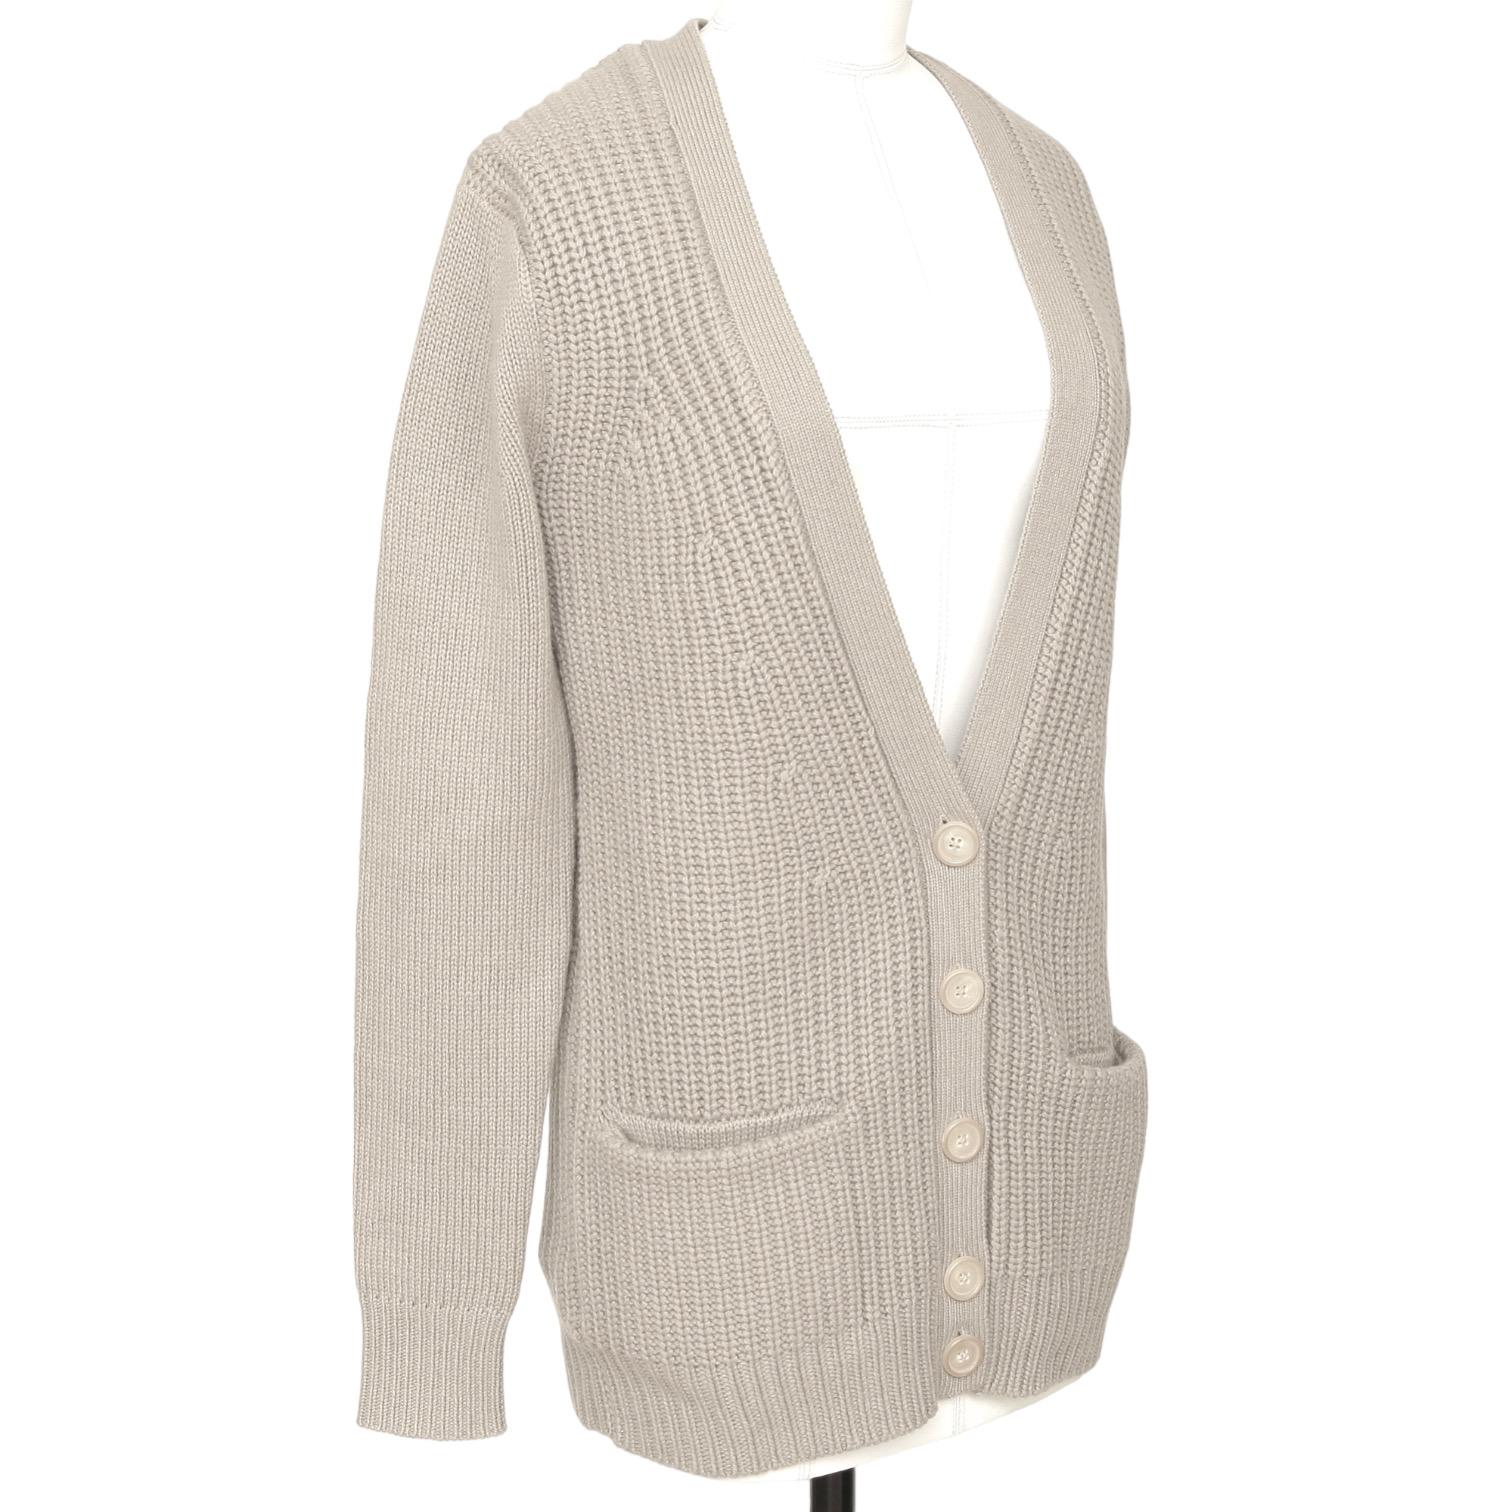 GUARANTEED AUTHENTIC CHLOE 2011 V-NECK CASHMERE SWEATER

Retail excluding sales taxes, $895

Details:
- Beige long sleeve cardigan has a great easy fit.
- Deep v-neck, button closure.
- Front dual pockets.
- Long sleeve.
- Easy great piece for your